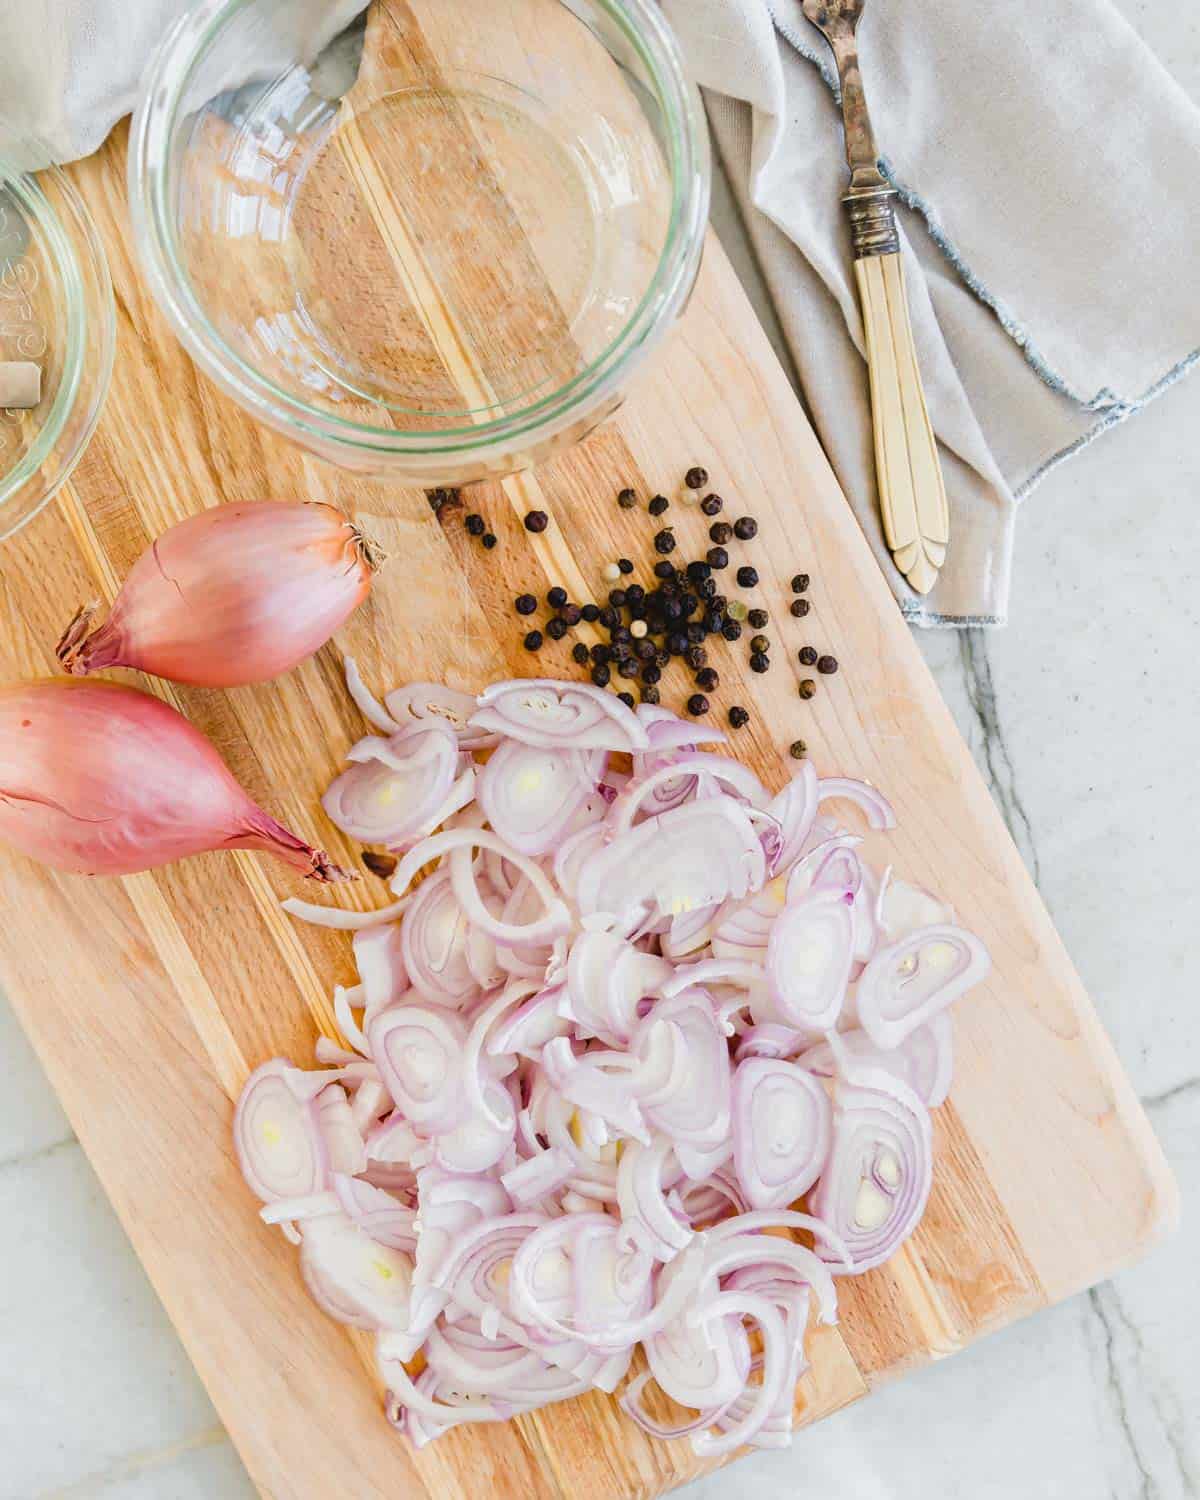 Sliced shallots and peppercorns on a cutting board.